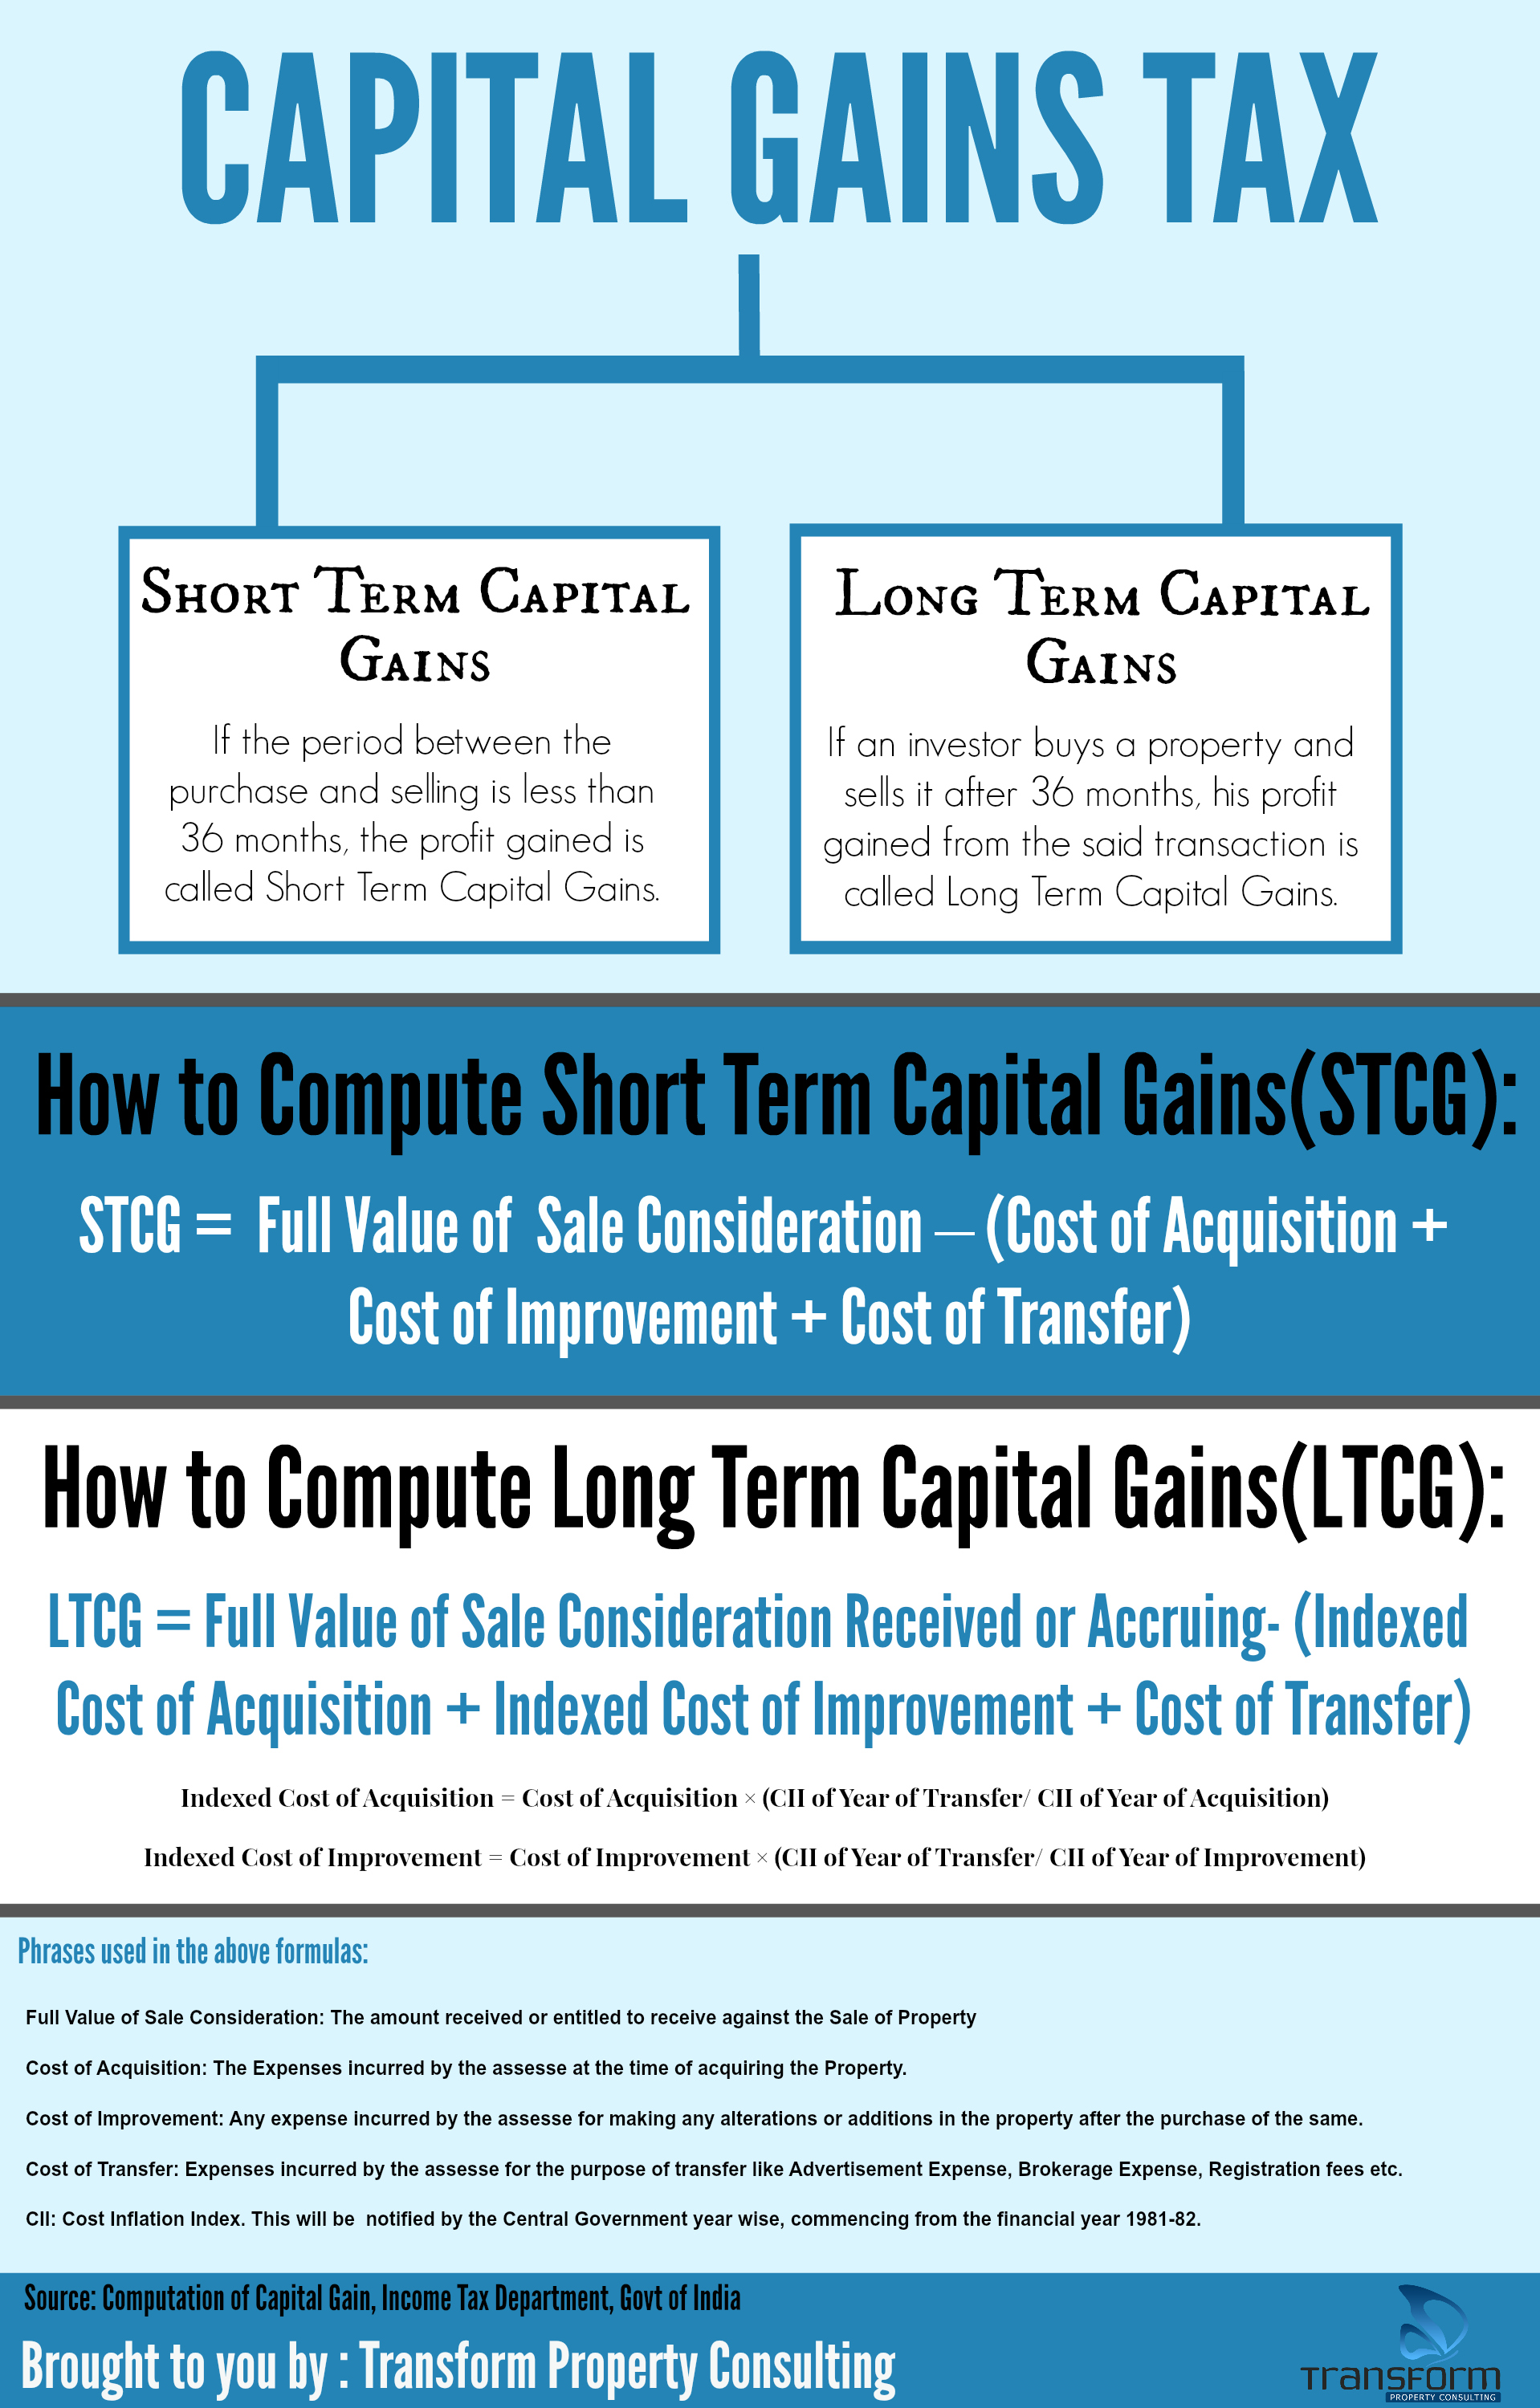 The Beginner's Guide to Capital Gains Tax + Infographic Transform